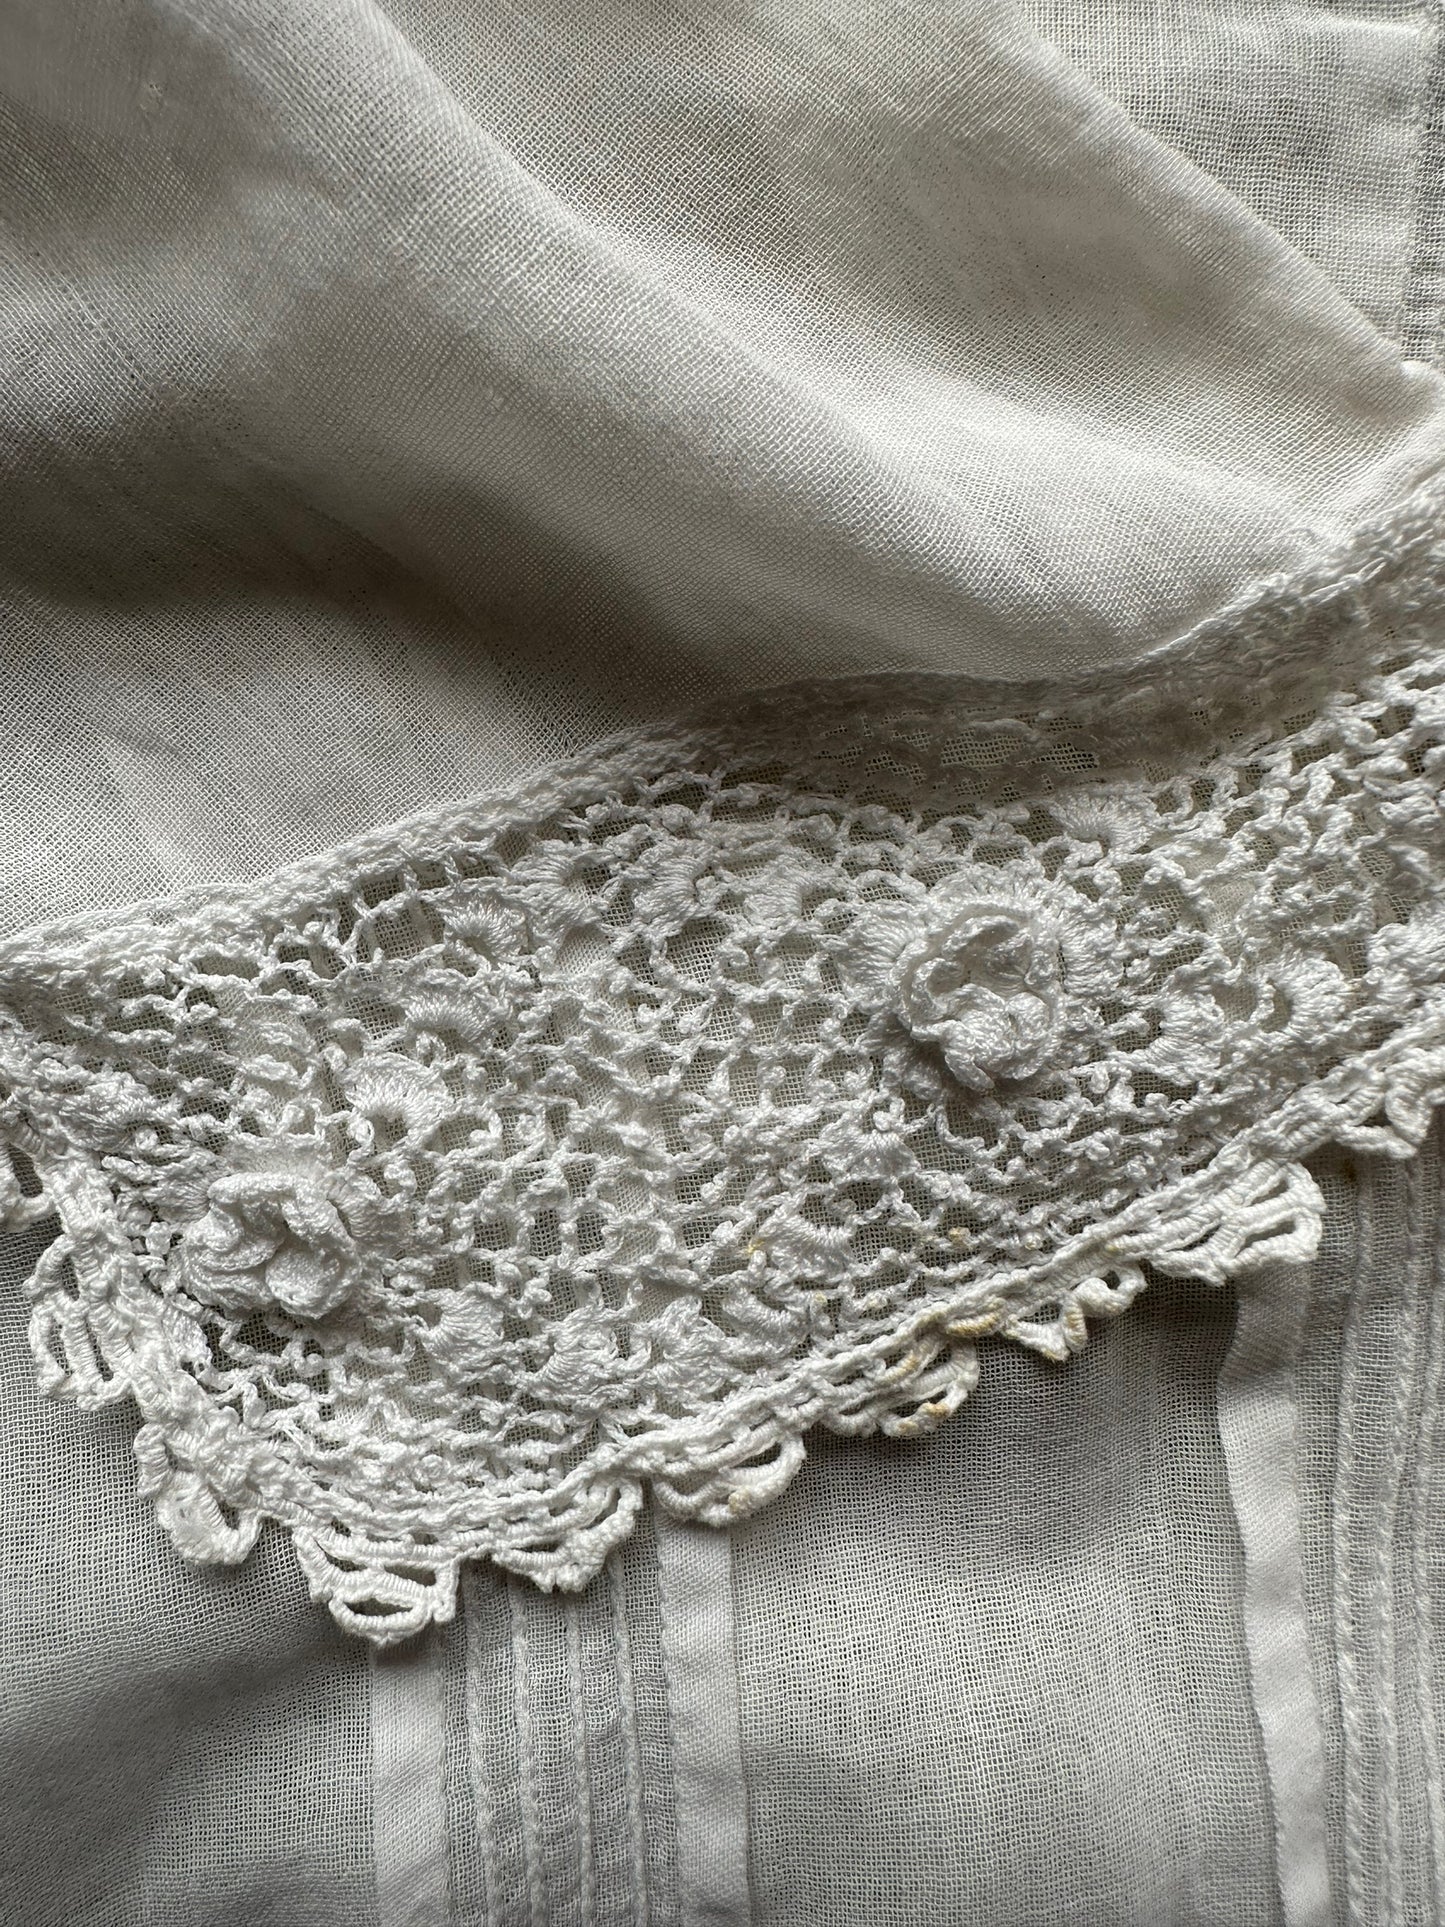 Lace close up Early 1900's Edwardian Blouse | Seattle True Vintage | Barn Owl Ladies Clothing